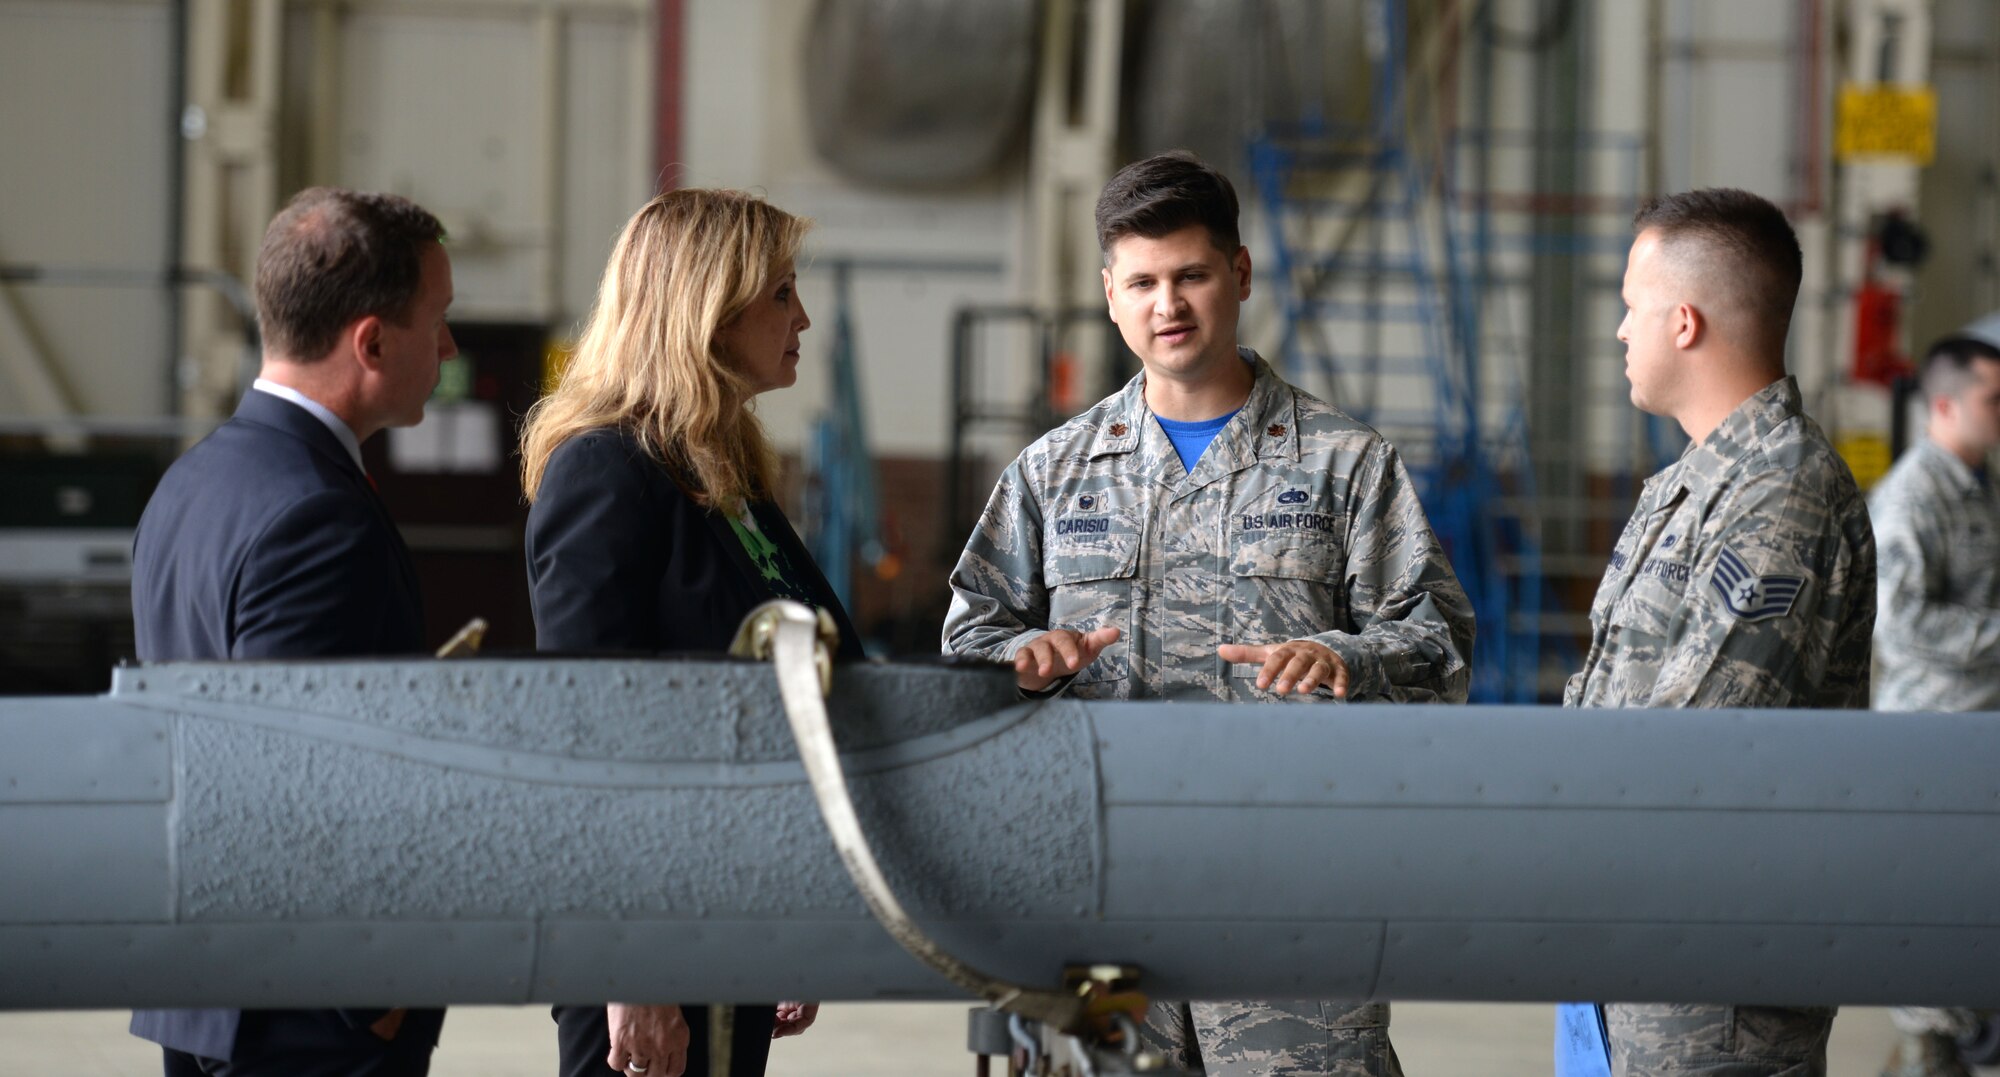 U.S. Air Force Maj. Gerard Carisio, second from right, 100th Maintenance Squadron commander, and U.S. Air Force Staff Sgt. Robert Summerville, right, 100th MXS Aircraft Hydraulics Systems journeyman, explain how the boom of KC-135 Stratotanker works to Amanda Simpson, second from left, Deputy Assistant Secretary of Defense for Operational Energy, and Robert Warshel, left, Director of Operations, Operational Energy Plans and Programs, during a tour of base July 29, 2016, on RAF Mildenhall, England. Simpson received several briefings about the KC-135 isochronal inspection process which highlighted efficiencies gained from continuous process improvement. (U.S. Air Force photo by Gina Randall)